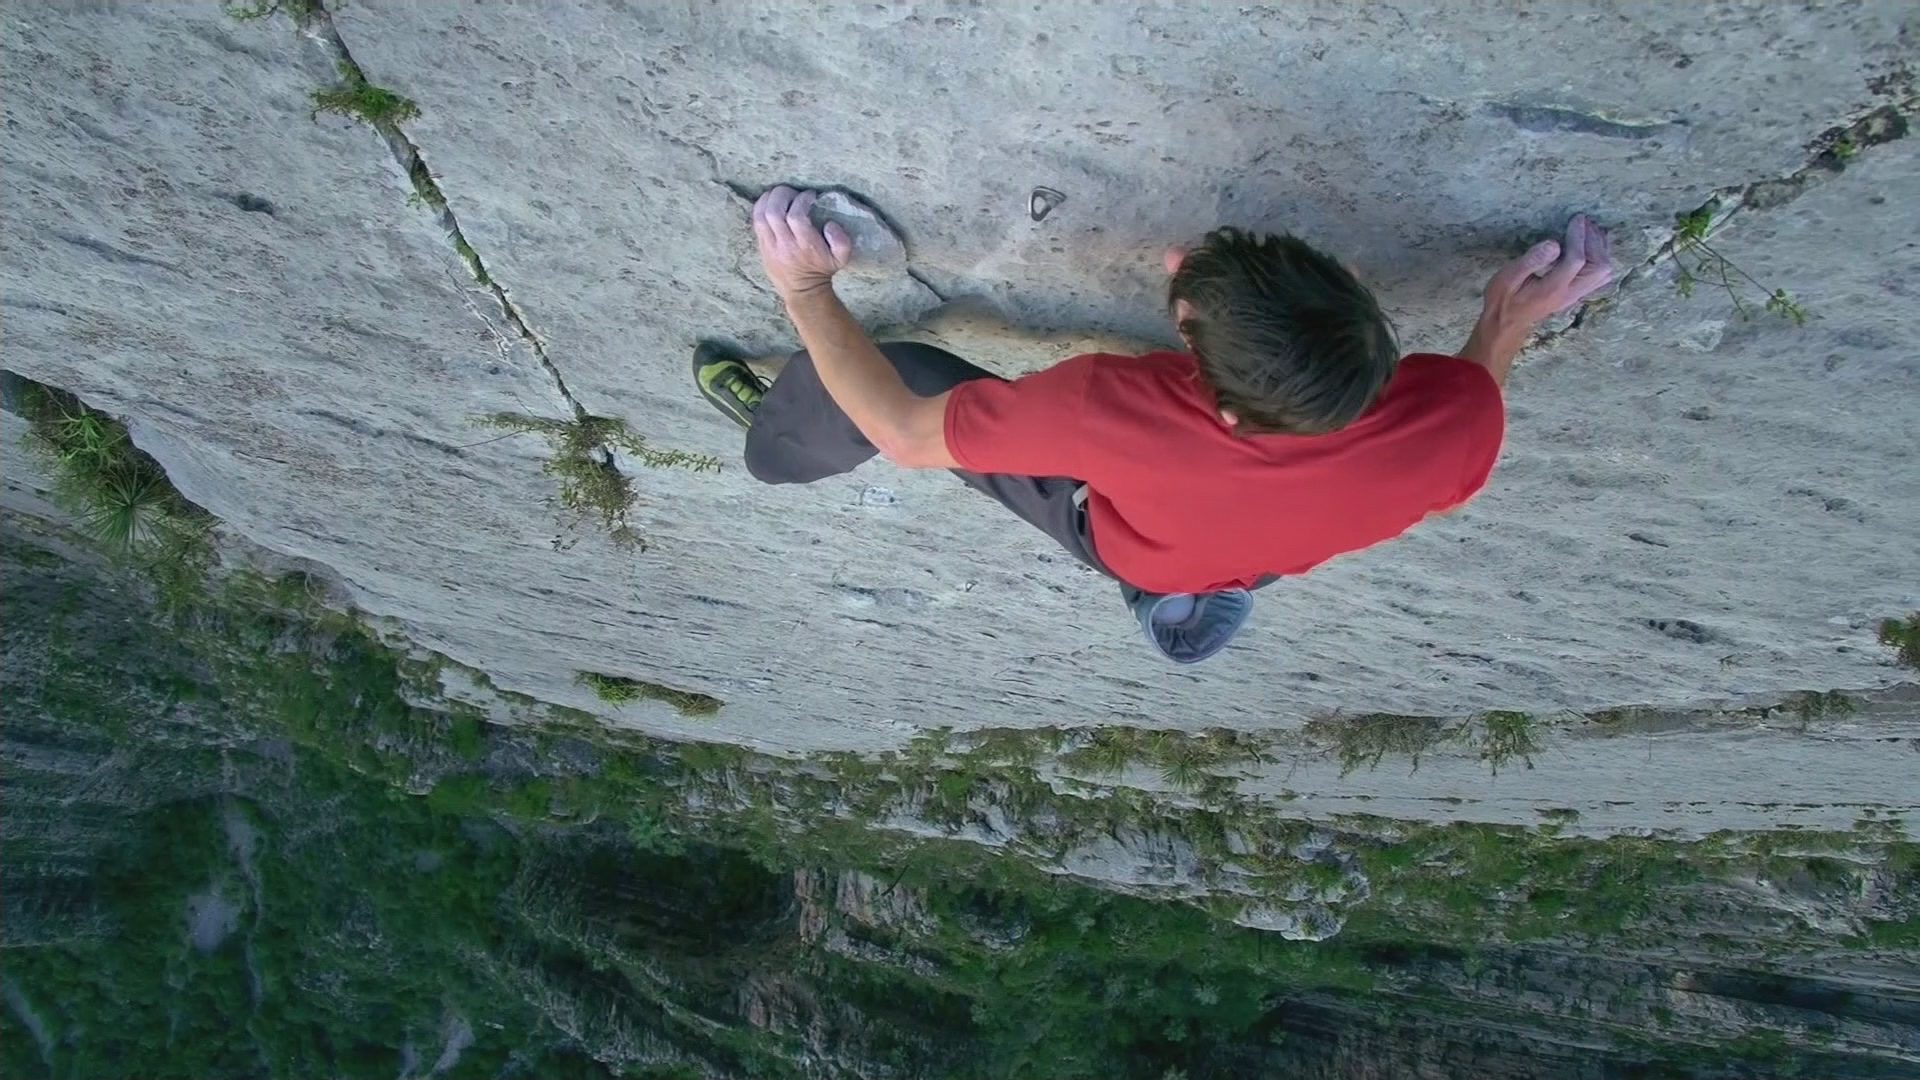 Alex Honnold perfects art of ‘free solo’ rock climbing